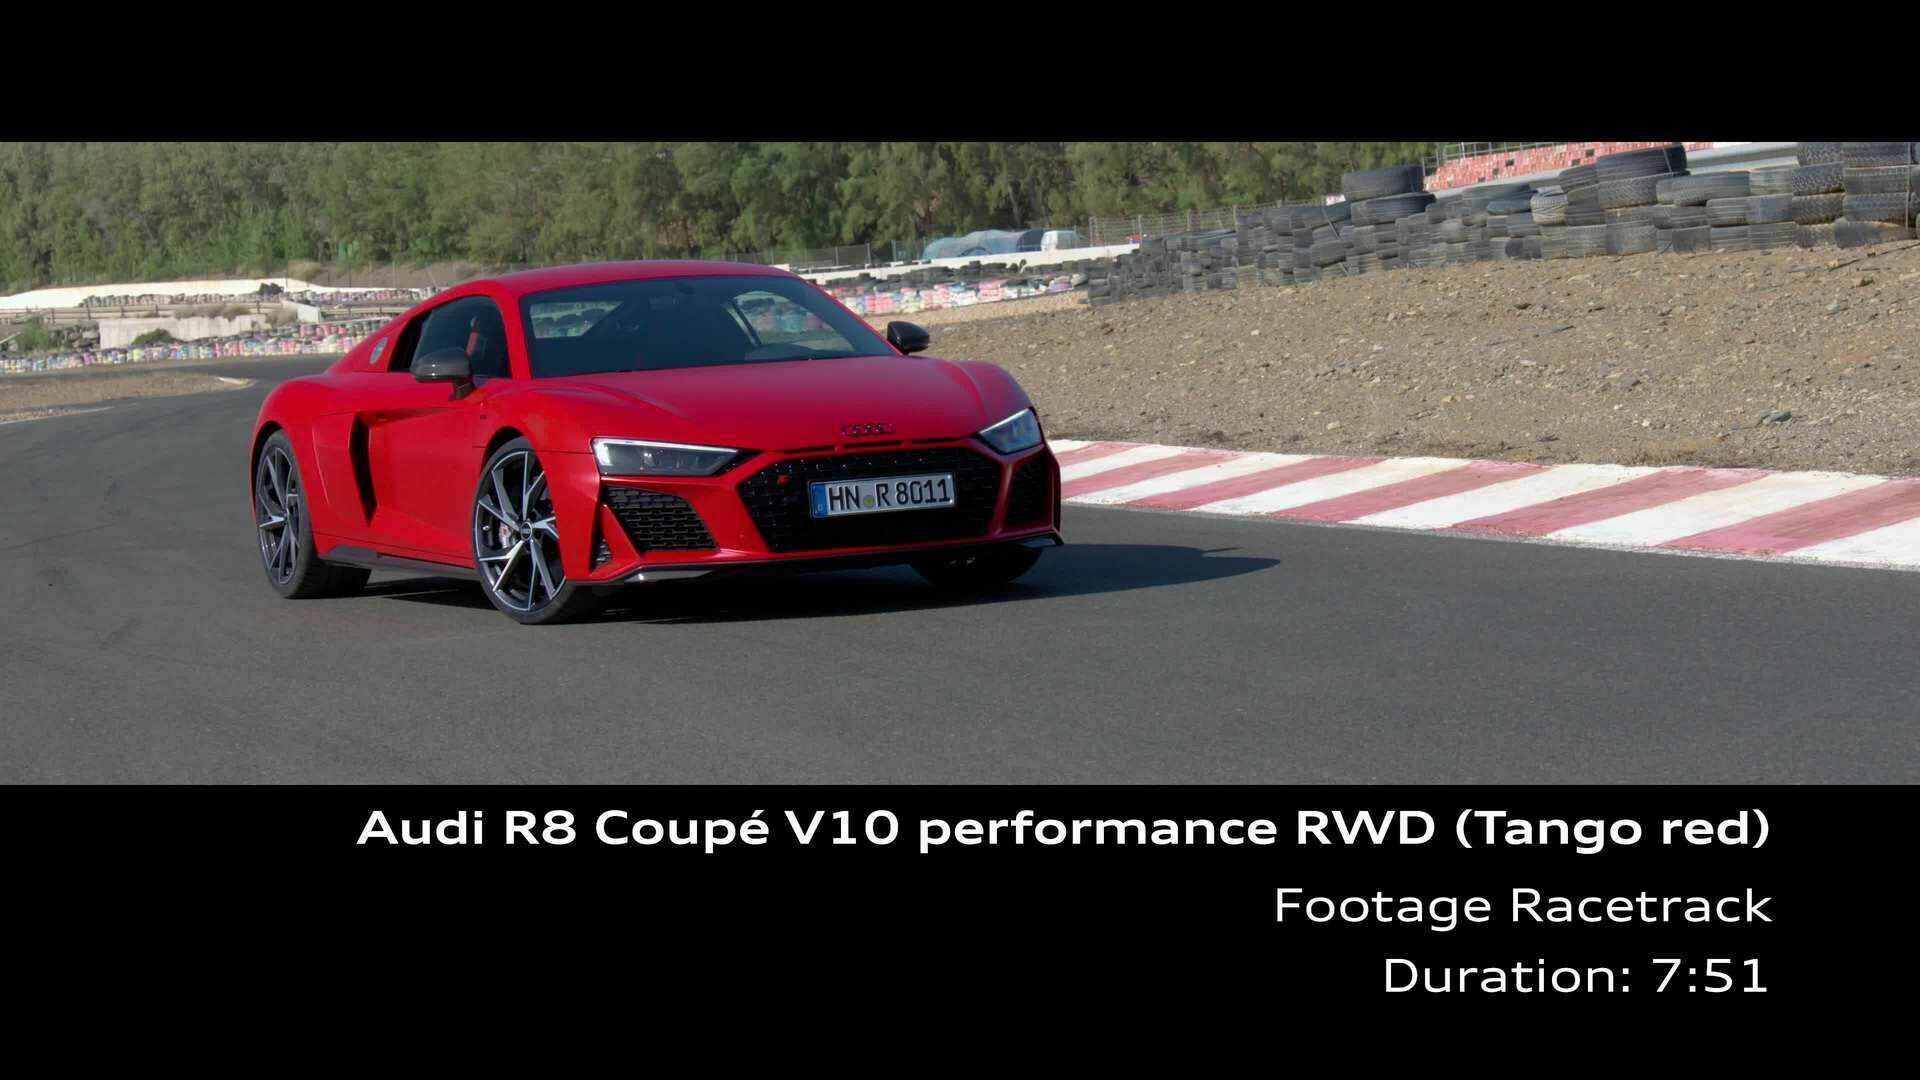 Footage: Audi R8 Coupé V10 performance in Tangorot 